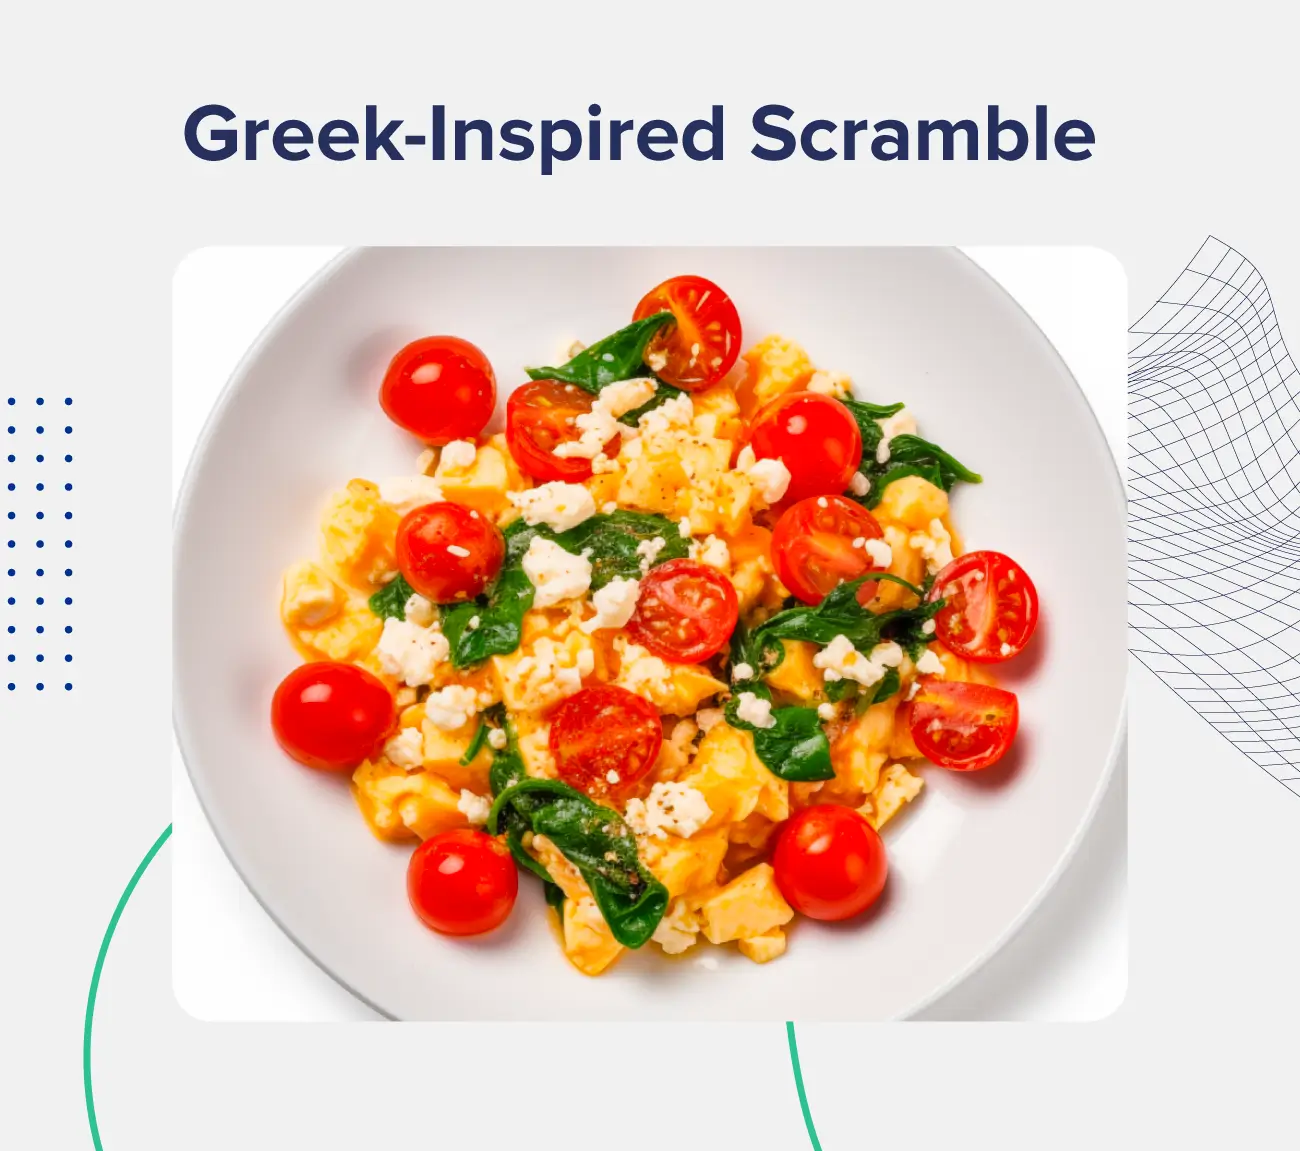 A graphic entitled "Greek-Inspired Scramble" showing an image of scrambled eggs with tomato, spinach, and feta.